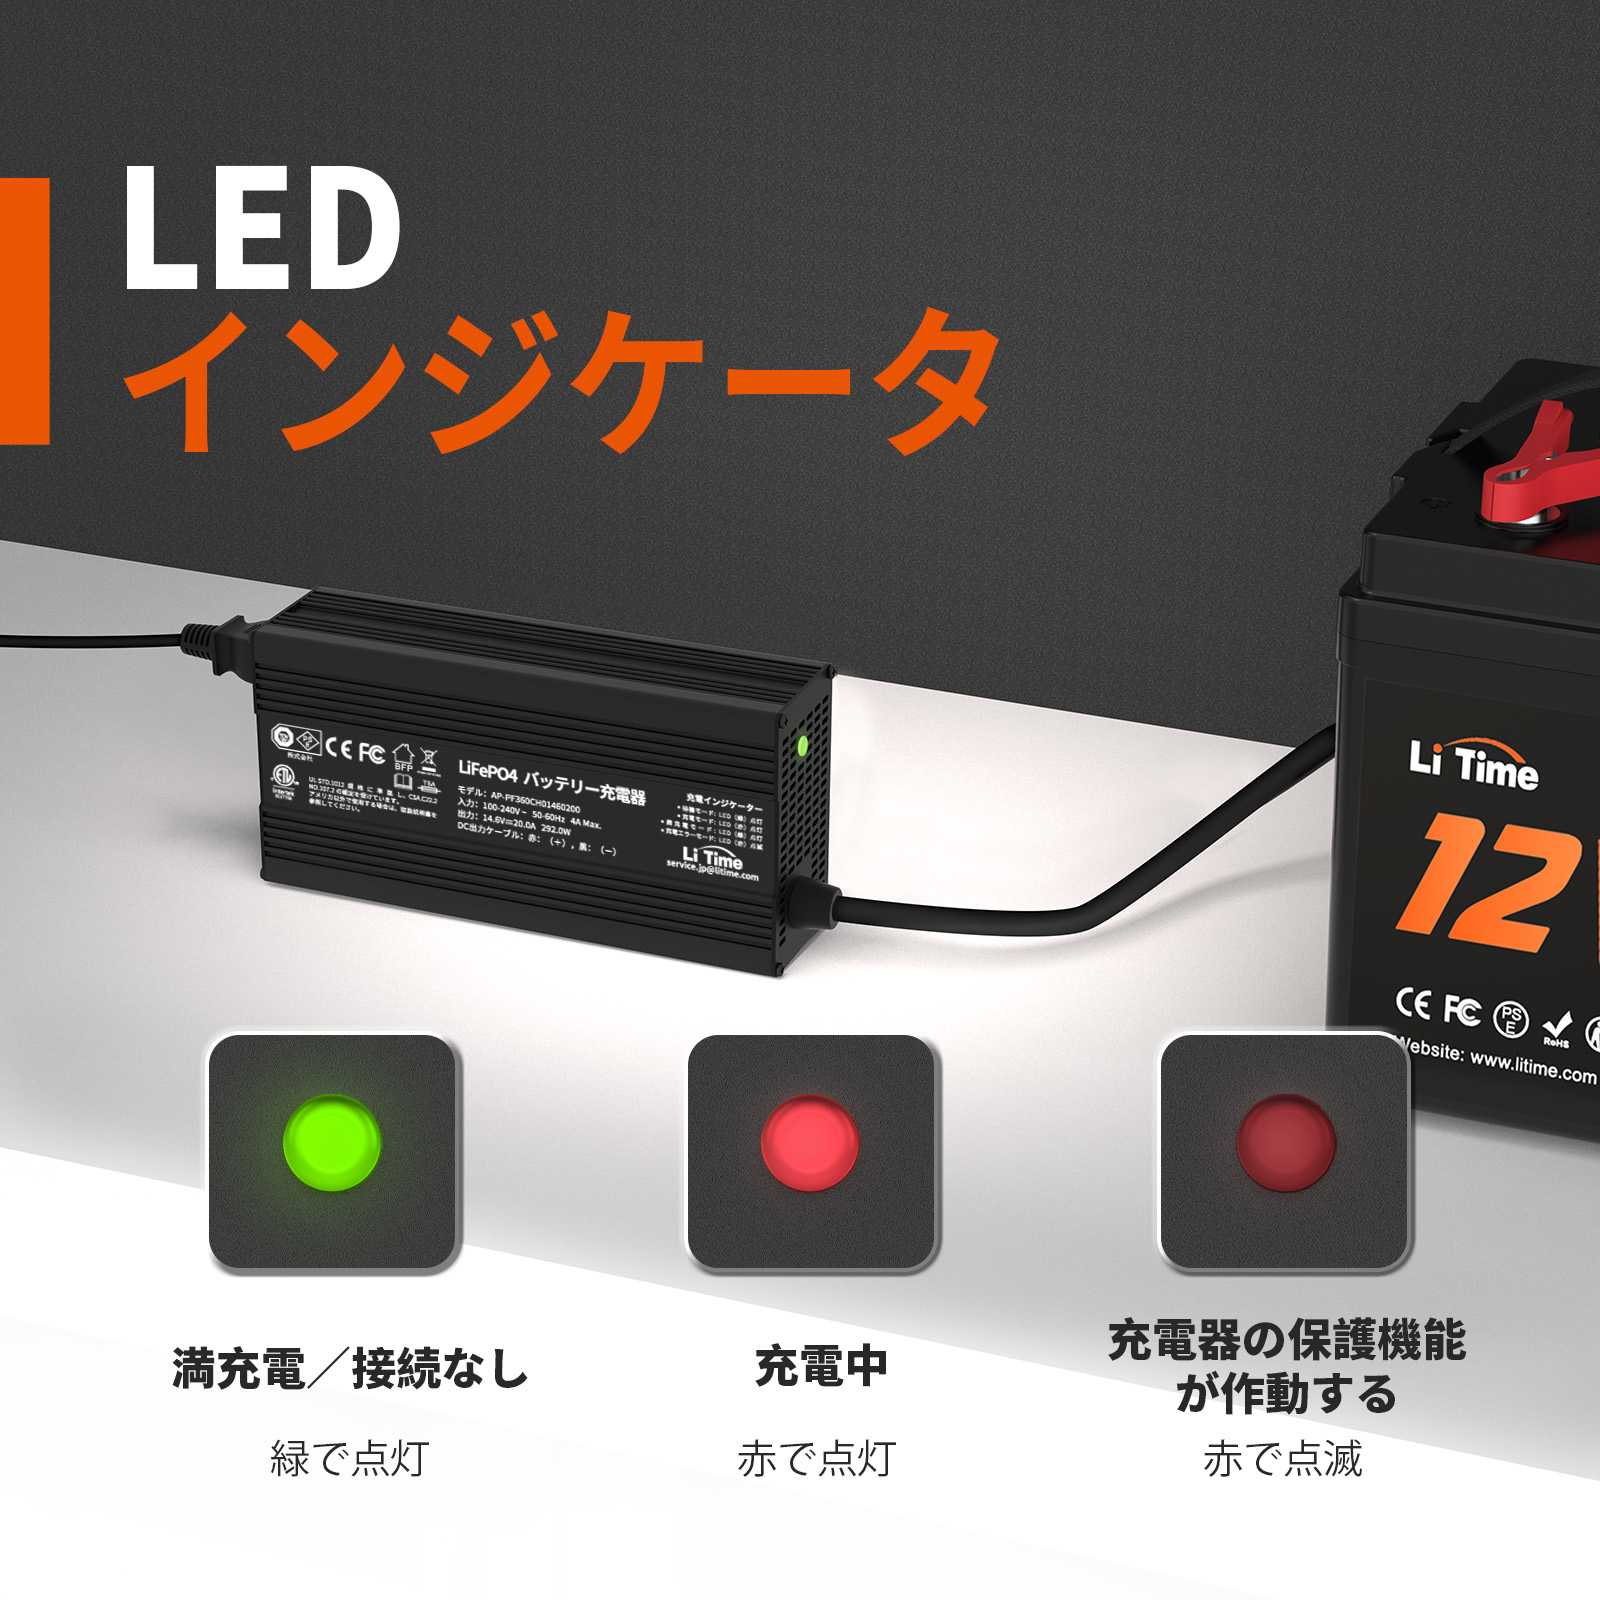 LiTime「Ampere Time 」 14.6V 20A リン酸鉄リチウムバッテリー専用・速い充電器   12Vバッテリー適用 ampere time